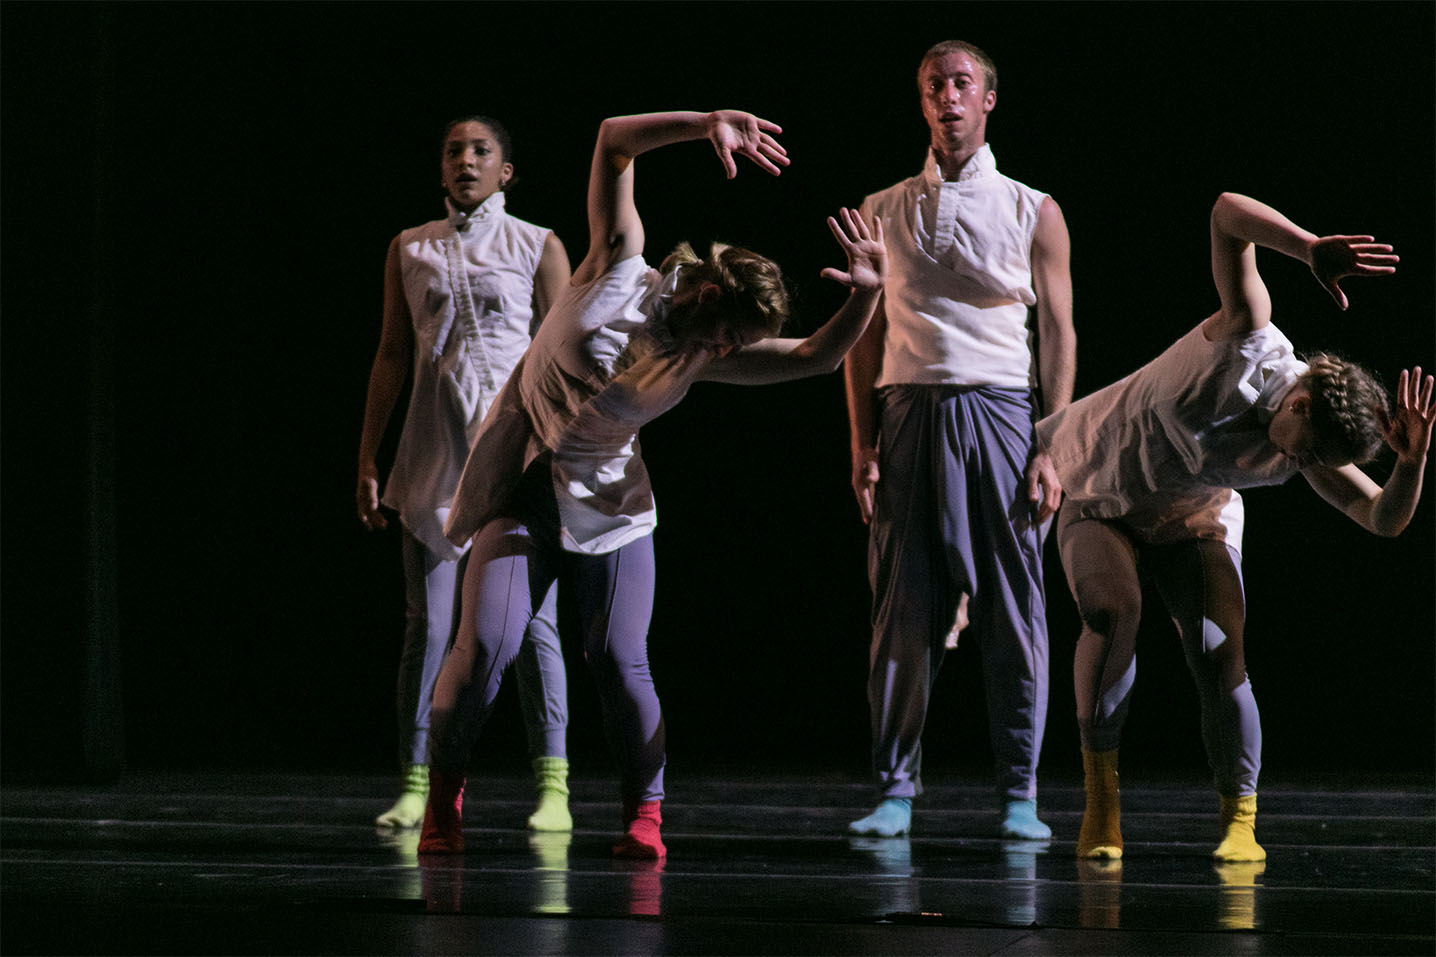 Two female dancers in the front bend their torso to the right side, their arms raised above their heads. Behind them, one female dancer and one male dancer stand skill, arms resting at their sides. All dancers are wearing white tops, purple-gray pants, and bright colorful socks.